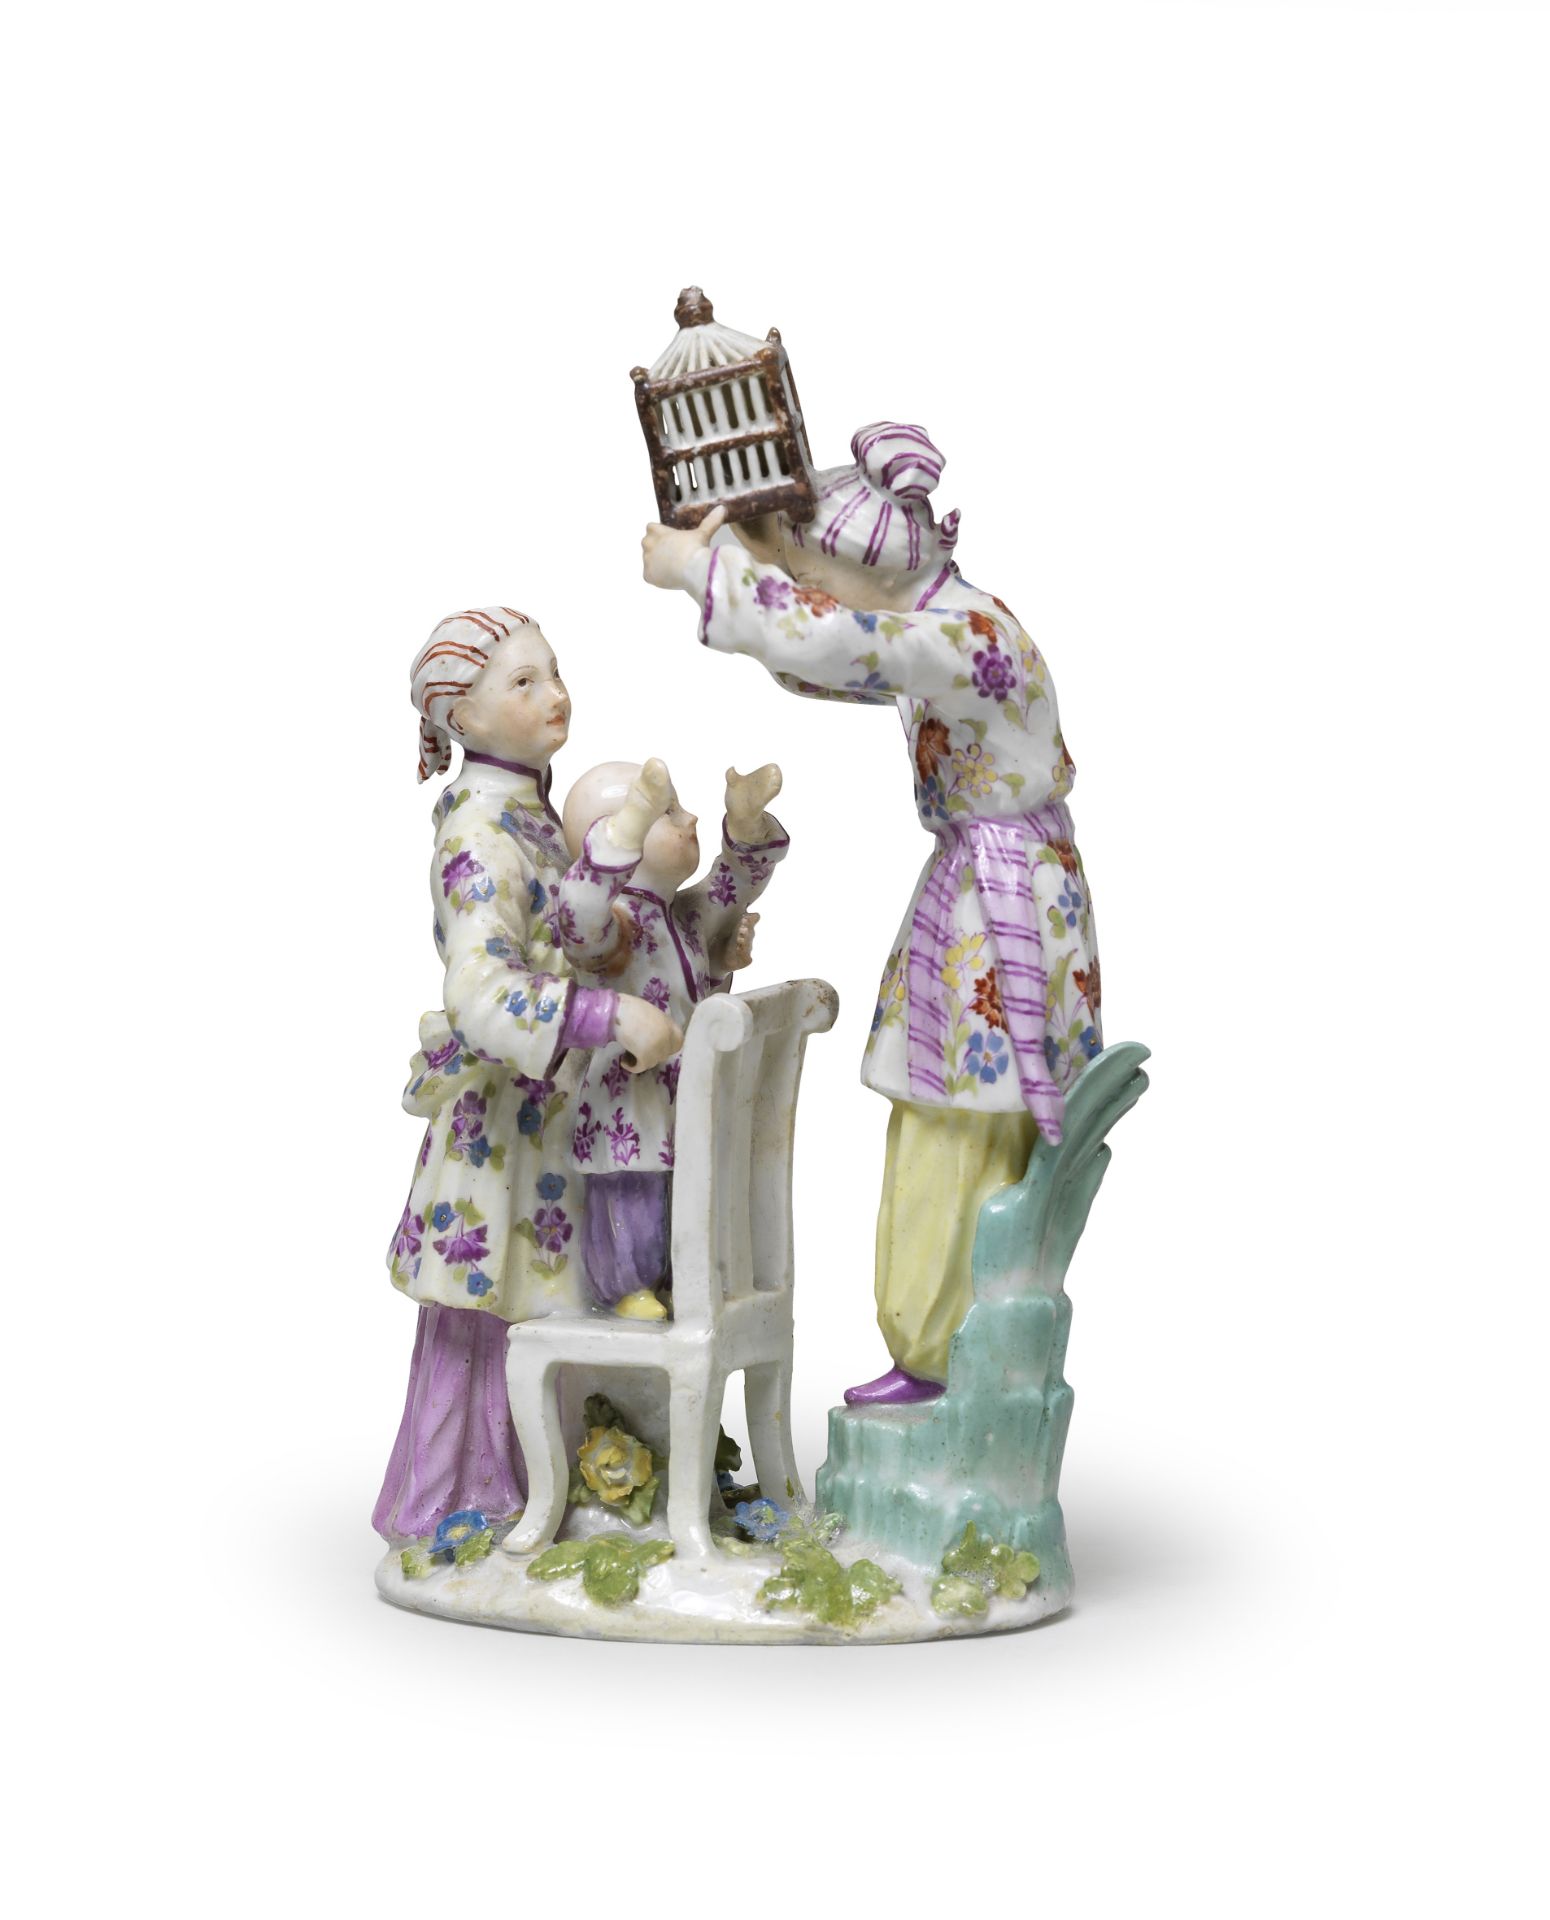 A Meissen Chinoiserie family group, mid 18th century